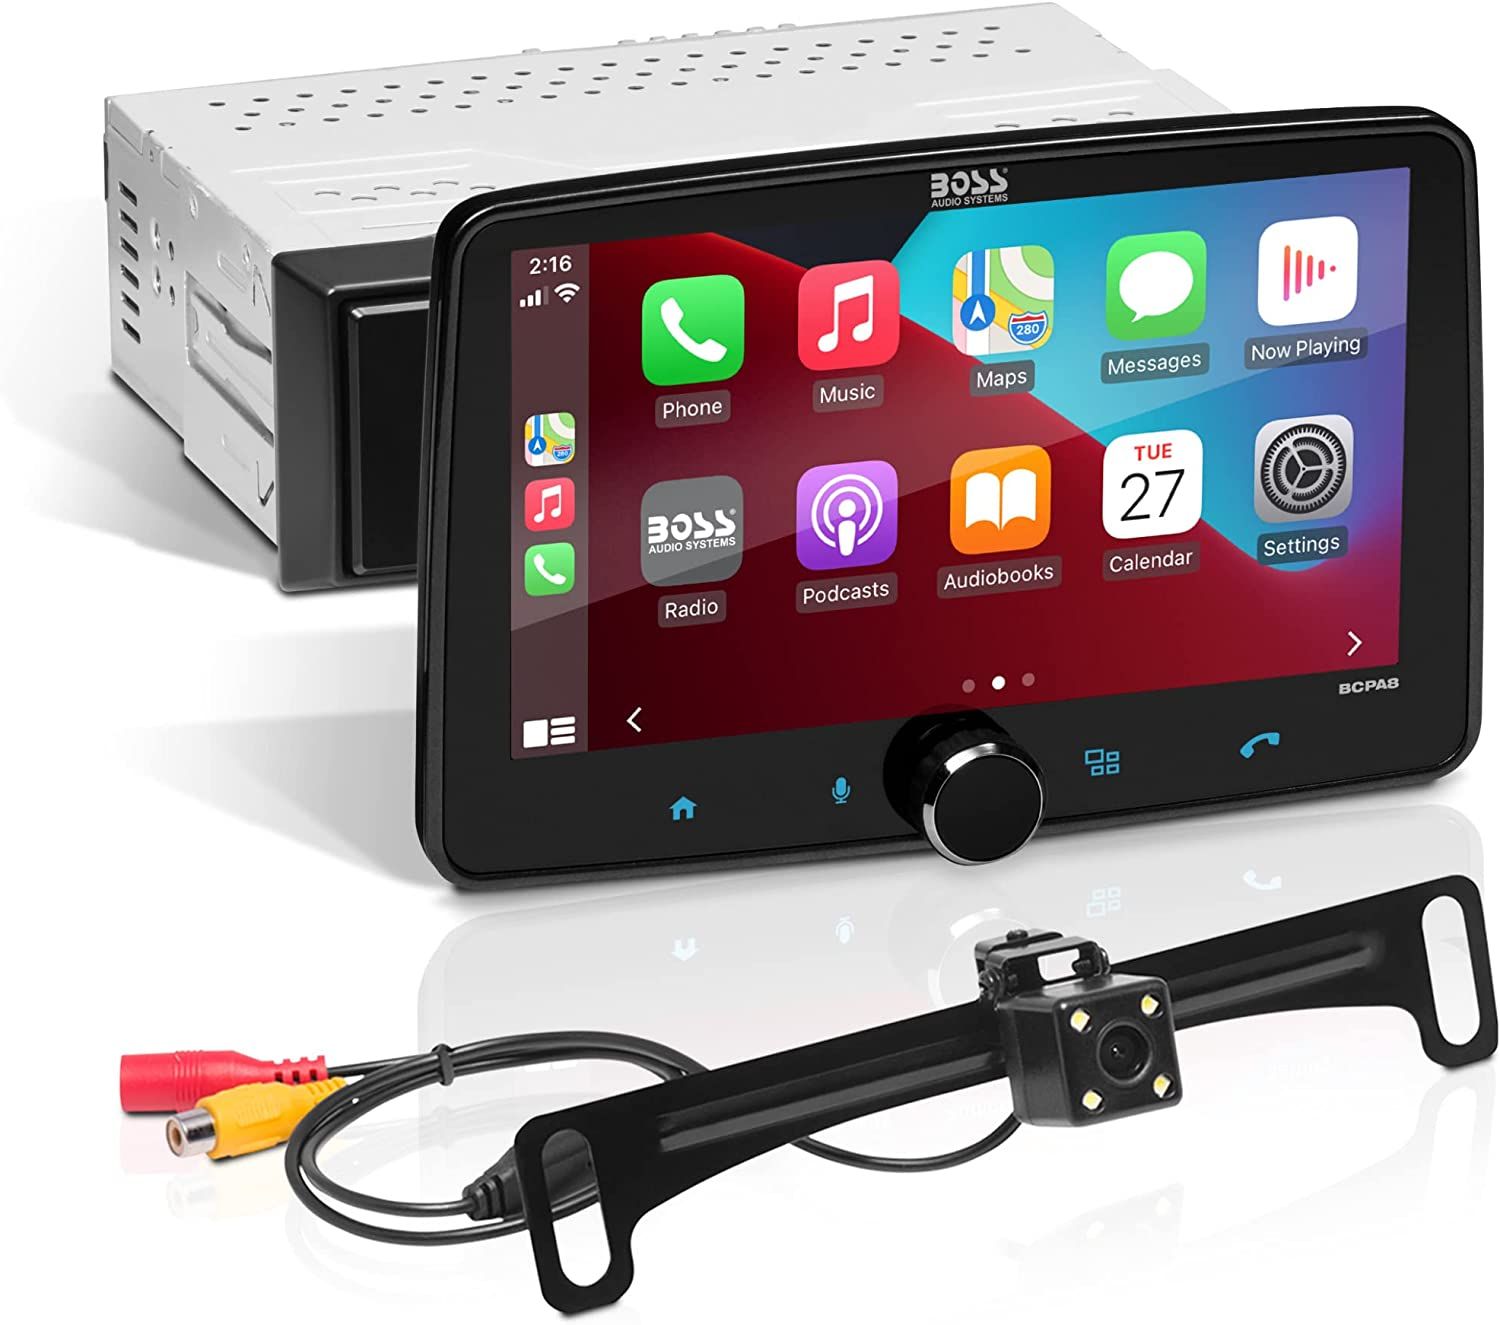 Bose BCPA8RC Android Sistem Stereo Mobil Otomatis